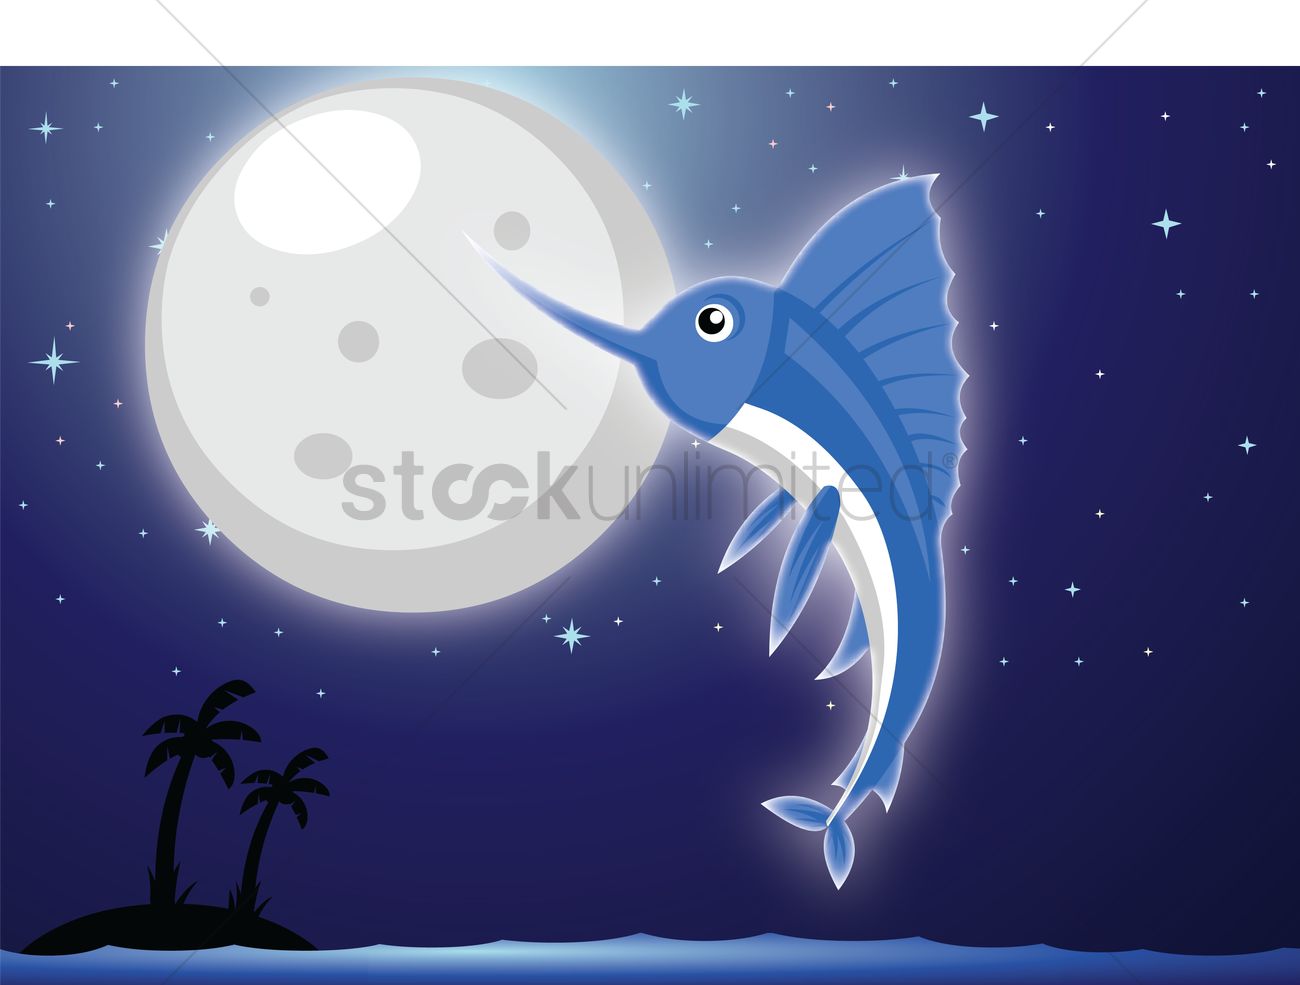 Marlin Fish Over A Moonlit Background Vector Image